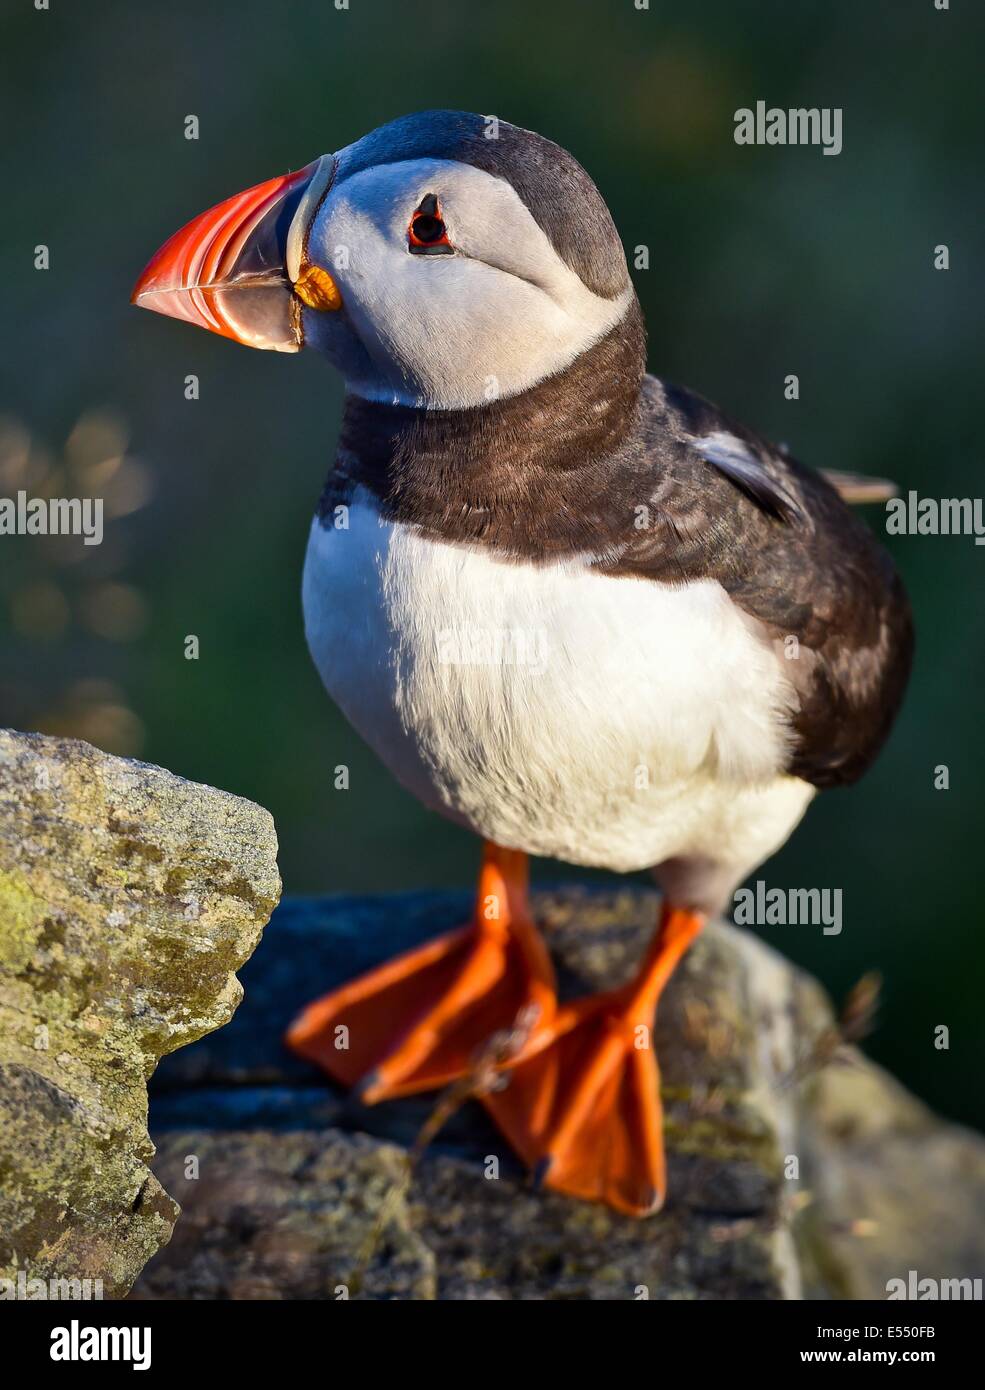 Alesund, Norway. 12th July, 2014. An Atlantic puffin (Fratercula arctica) is pictured on Norwegian island Runde (Goksøyr) near Alesund, Norway, 12 July 2014. The Atlantic puffin is about as tall as a domestic pigeon. Photo: Patrick Pleul/dpa/Alamy Live News Stock Photo